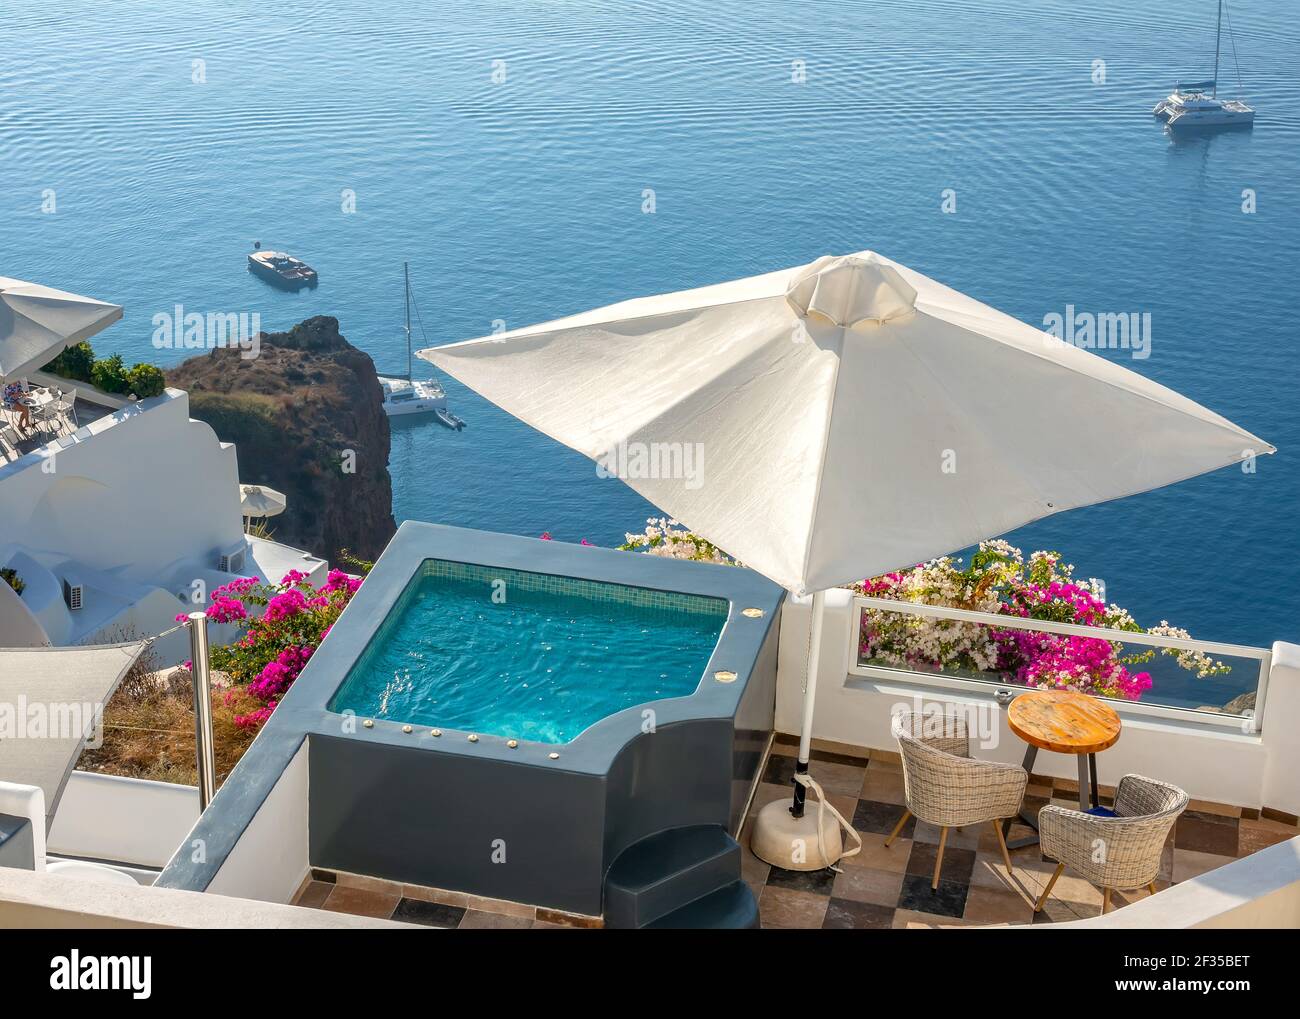 Santorini. Terraces on the high shore of Thera Island. Swimming pool and loungers for relaxing in sunny weather. Yachts by the shore Stock Photo